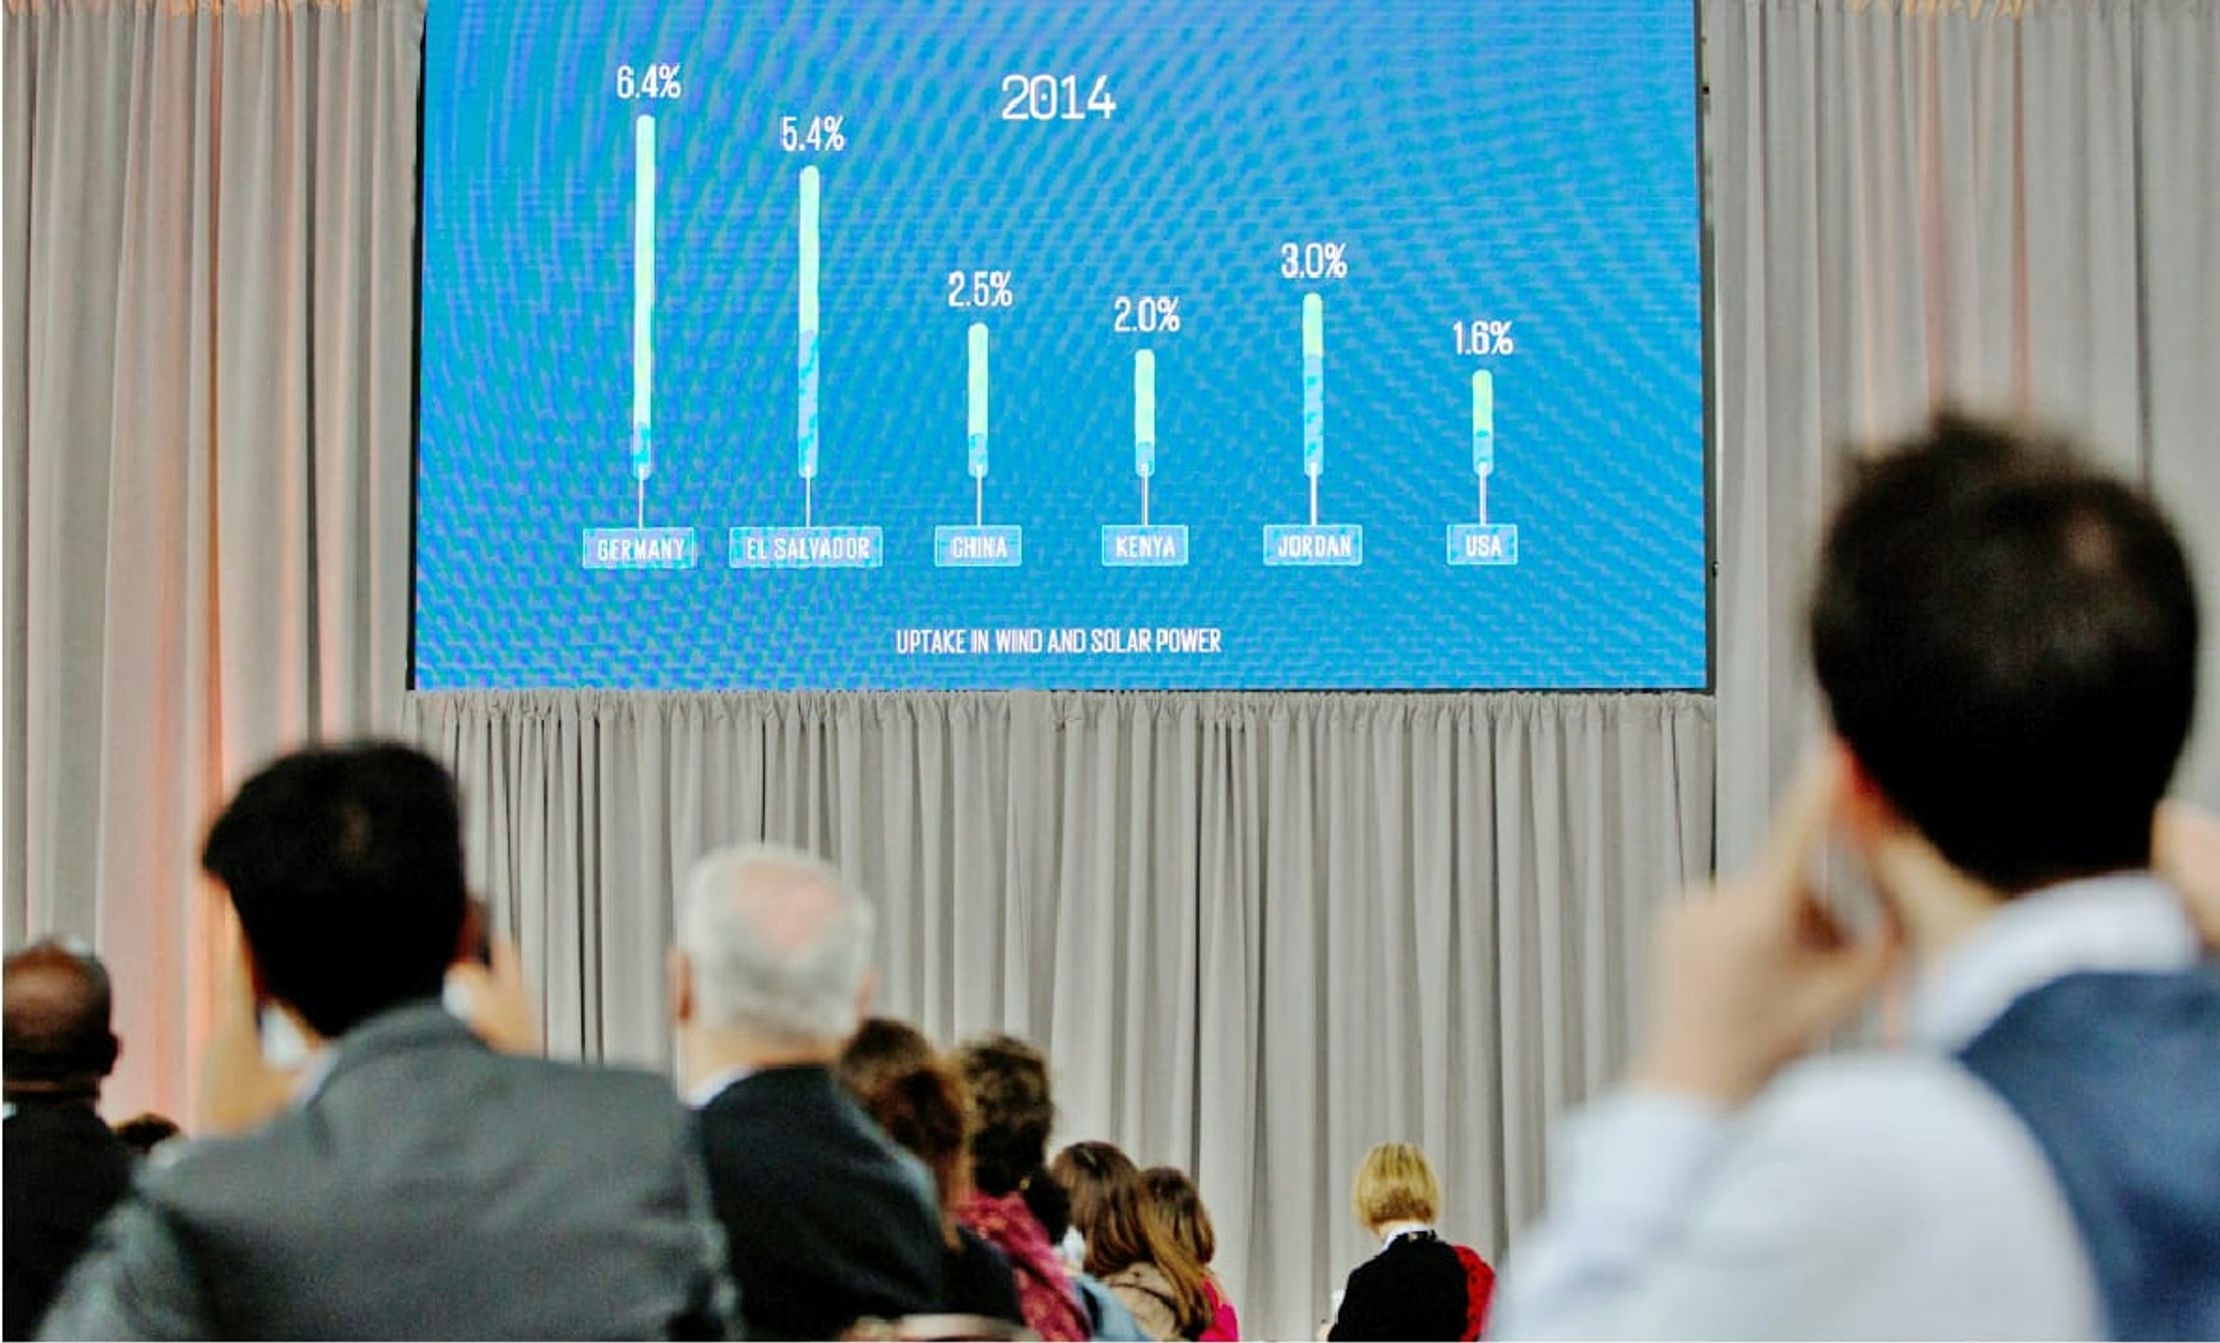 A shot taken from amongst a crowd of attendees at the Sustainable Energy Collection. In the background is a large screen with a data visualization displayed on it. 